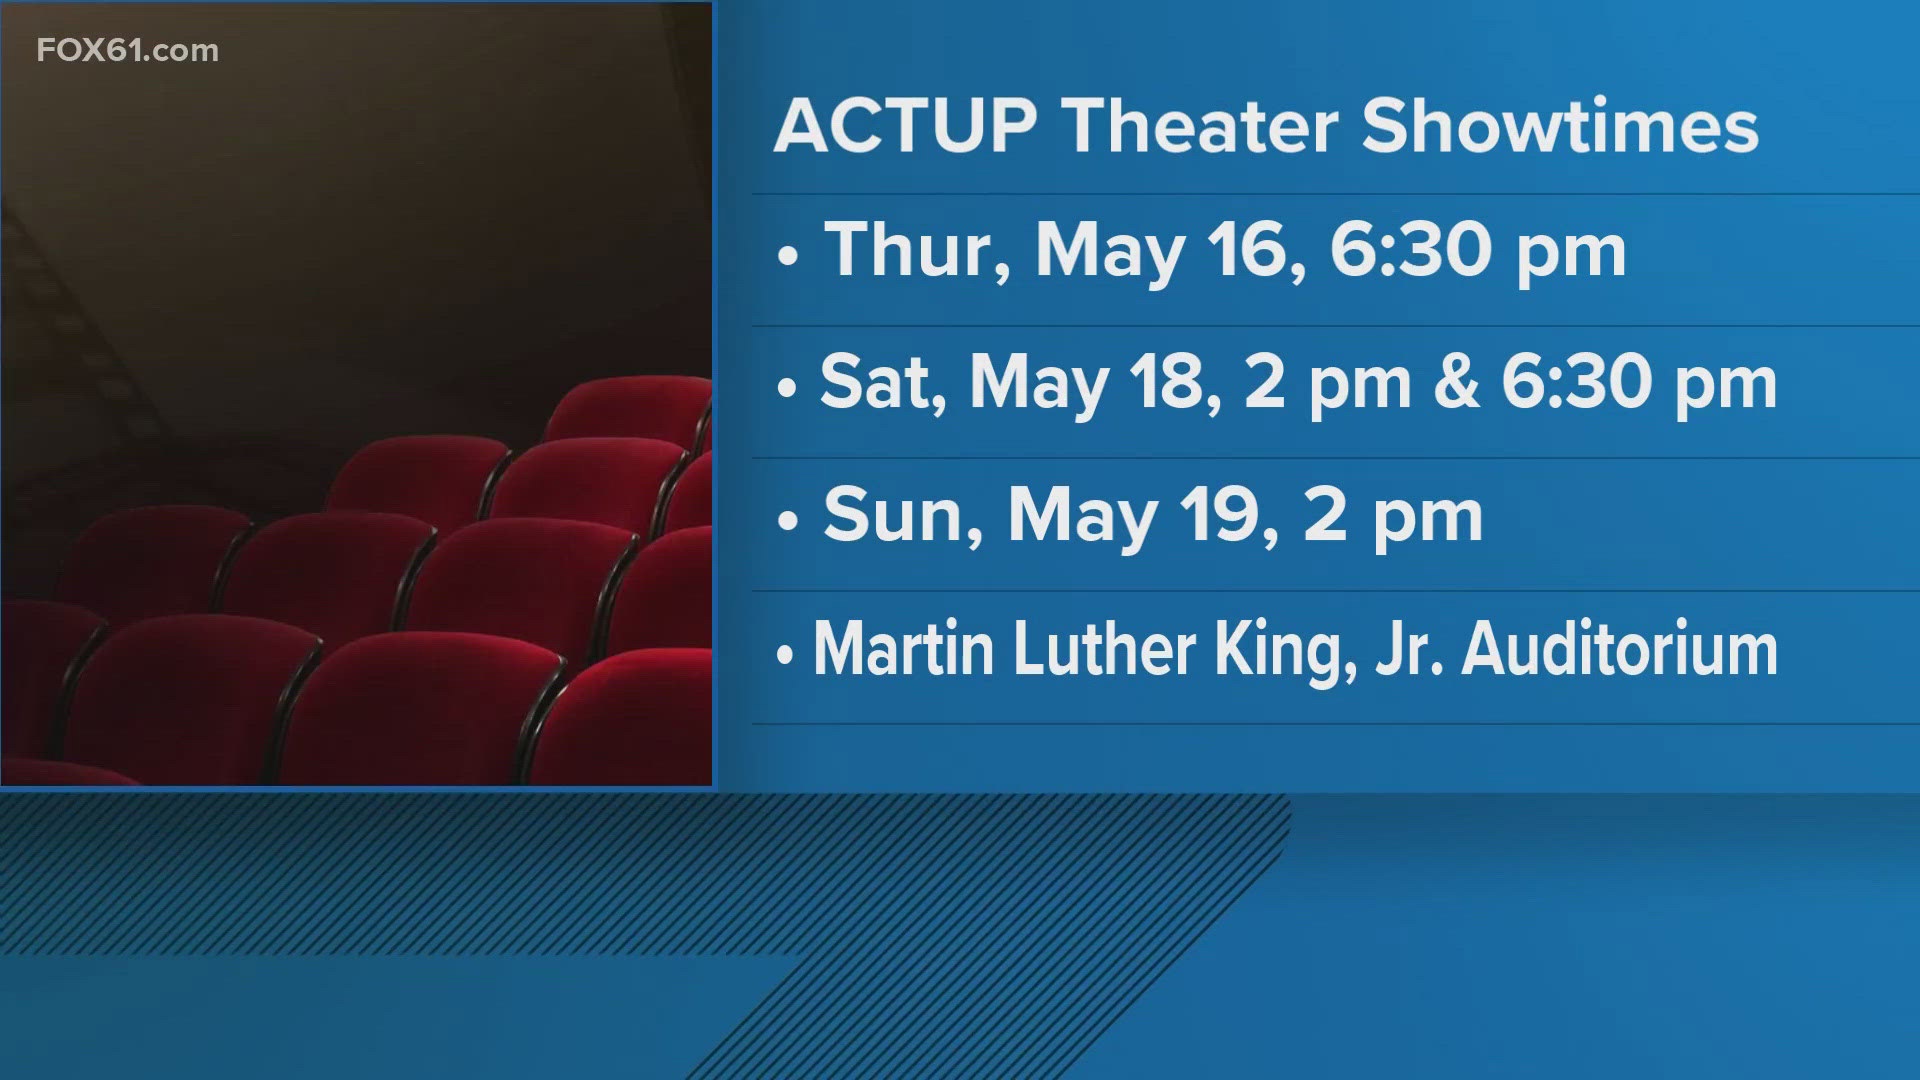 One of the most successful musicals on film is getting a modern twist in Hartford this weekend!